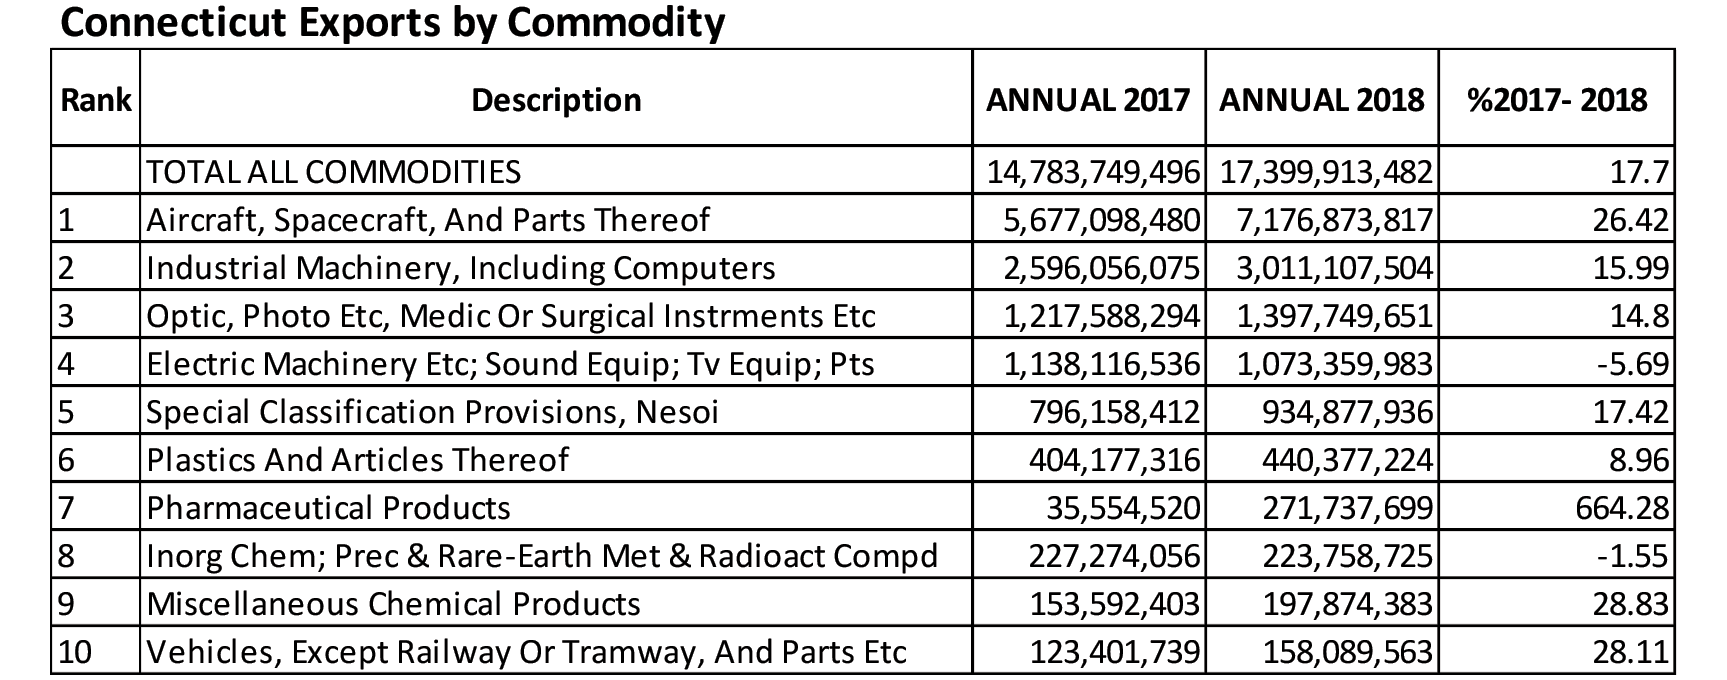 Chart 2. Connecticut Exports by Commodity